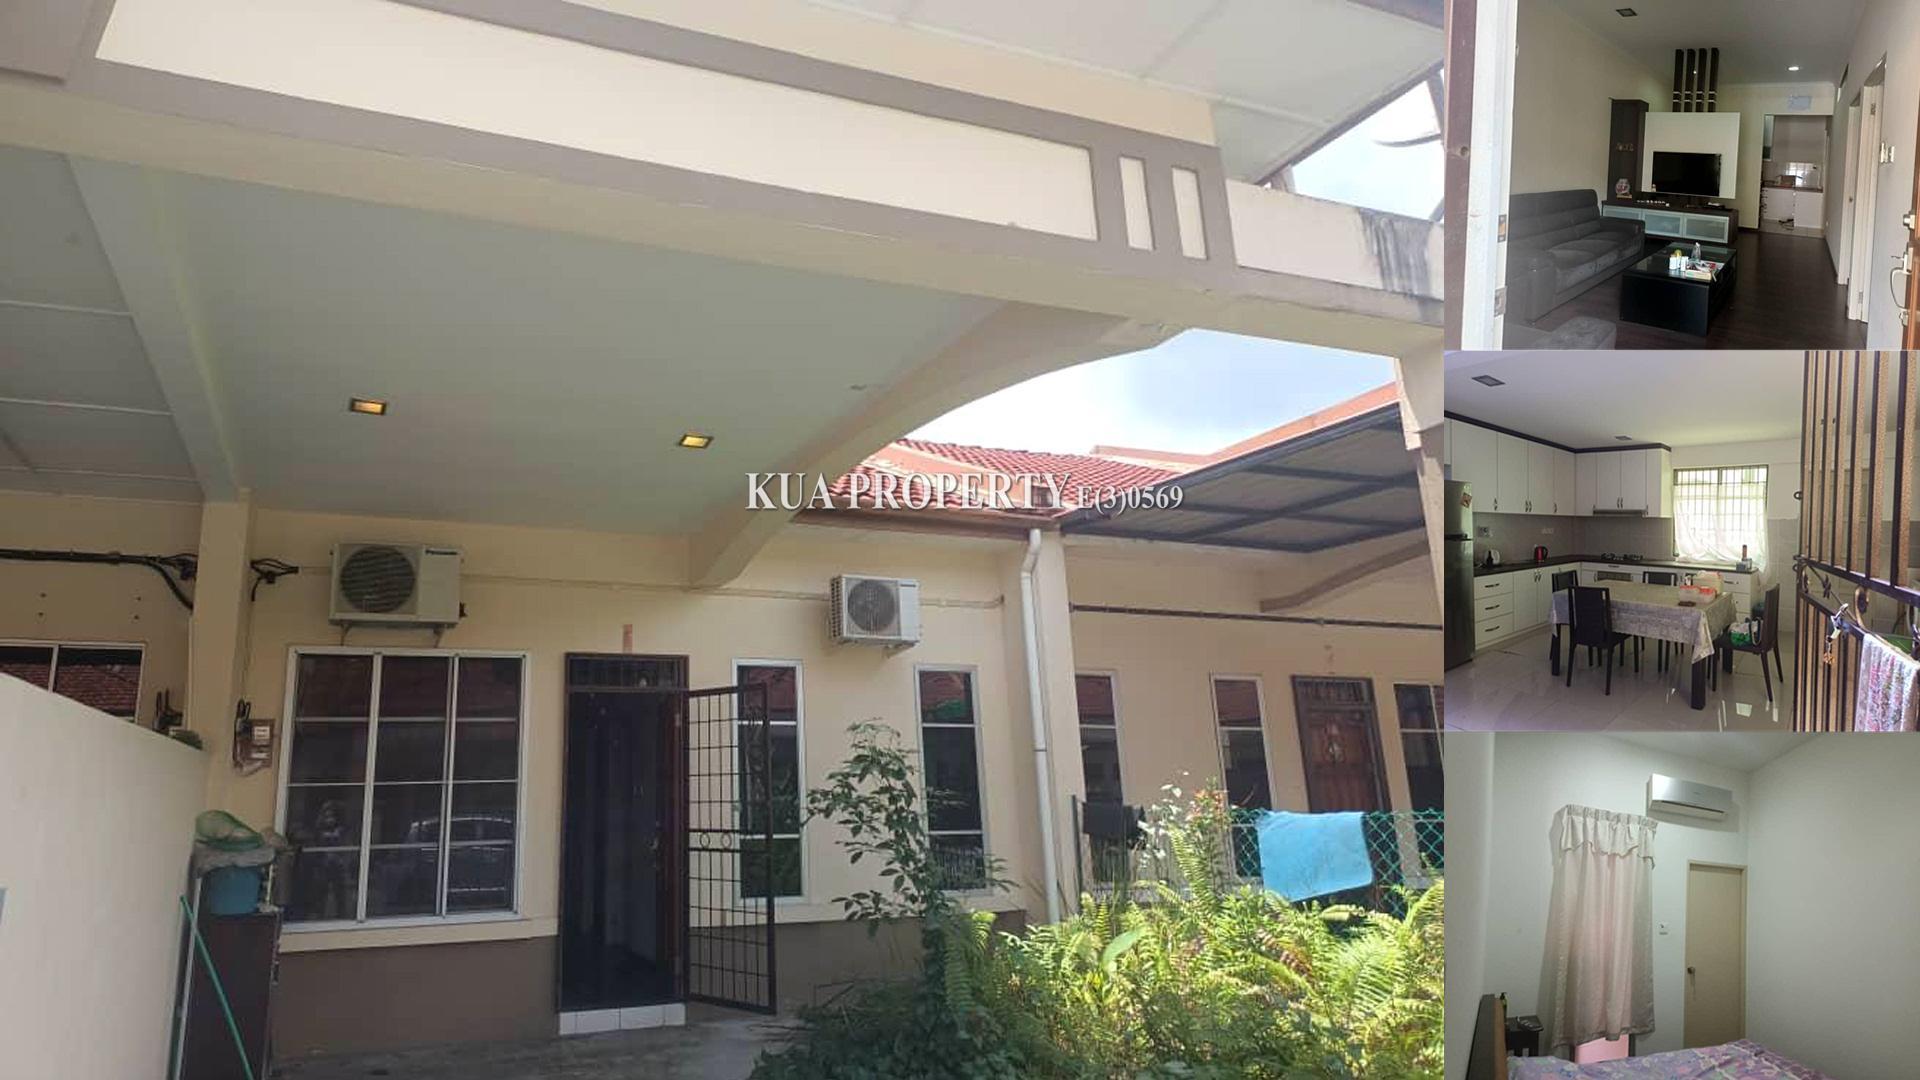 Single Storey Terrace intermediate House For Rent! at Midway Link, Samarahan